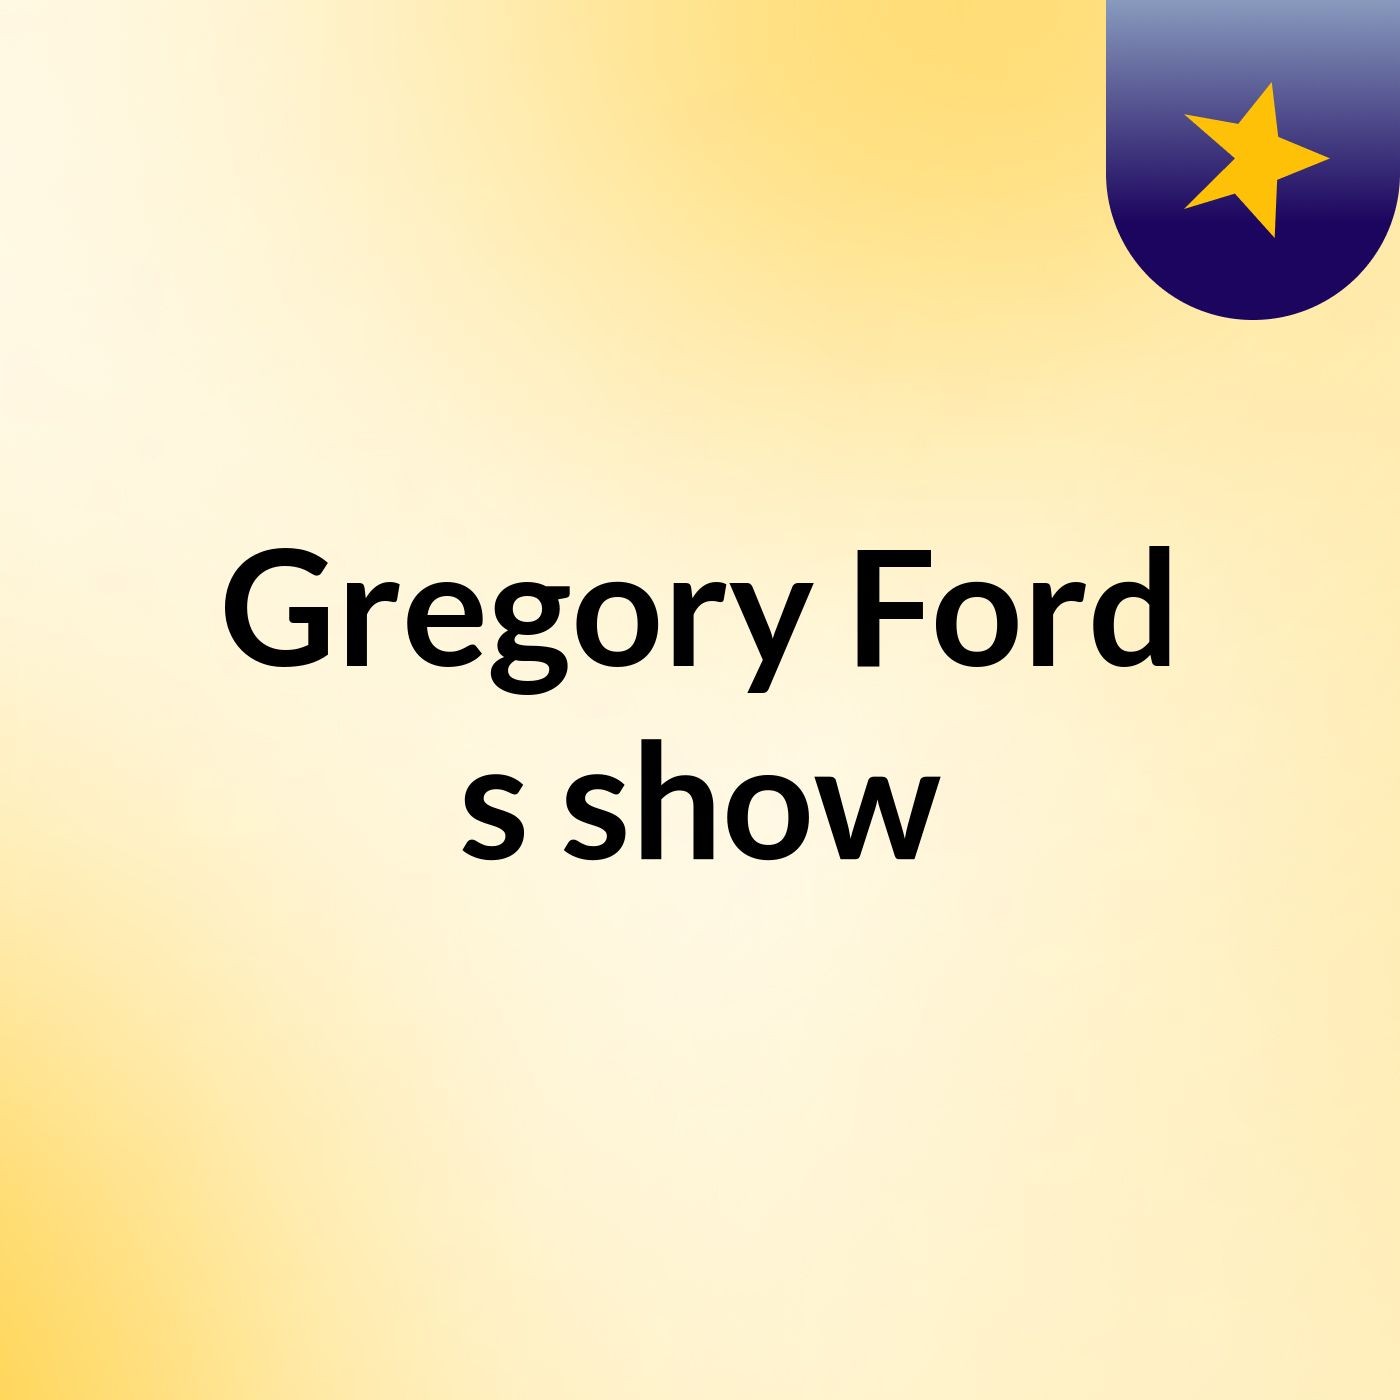 Episode 2 - Gregory Ford's show